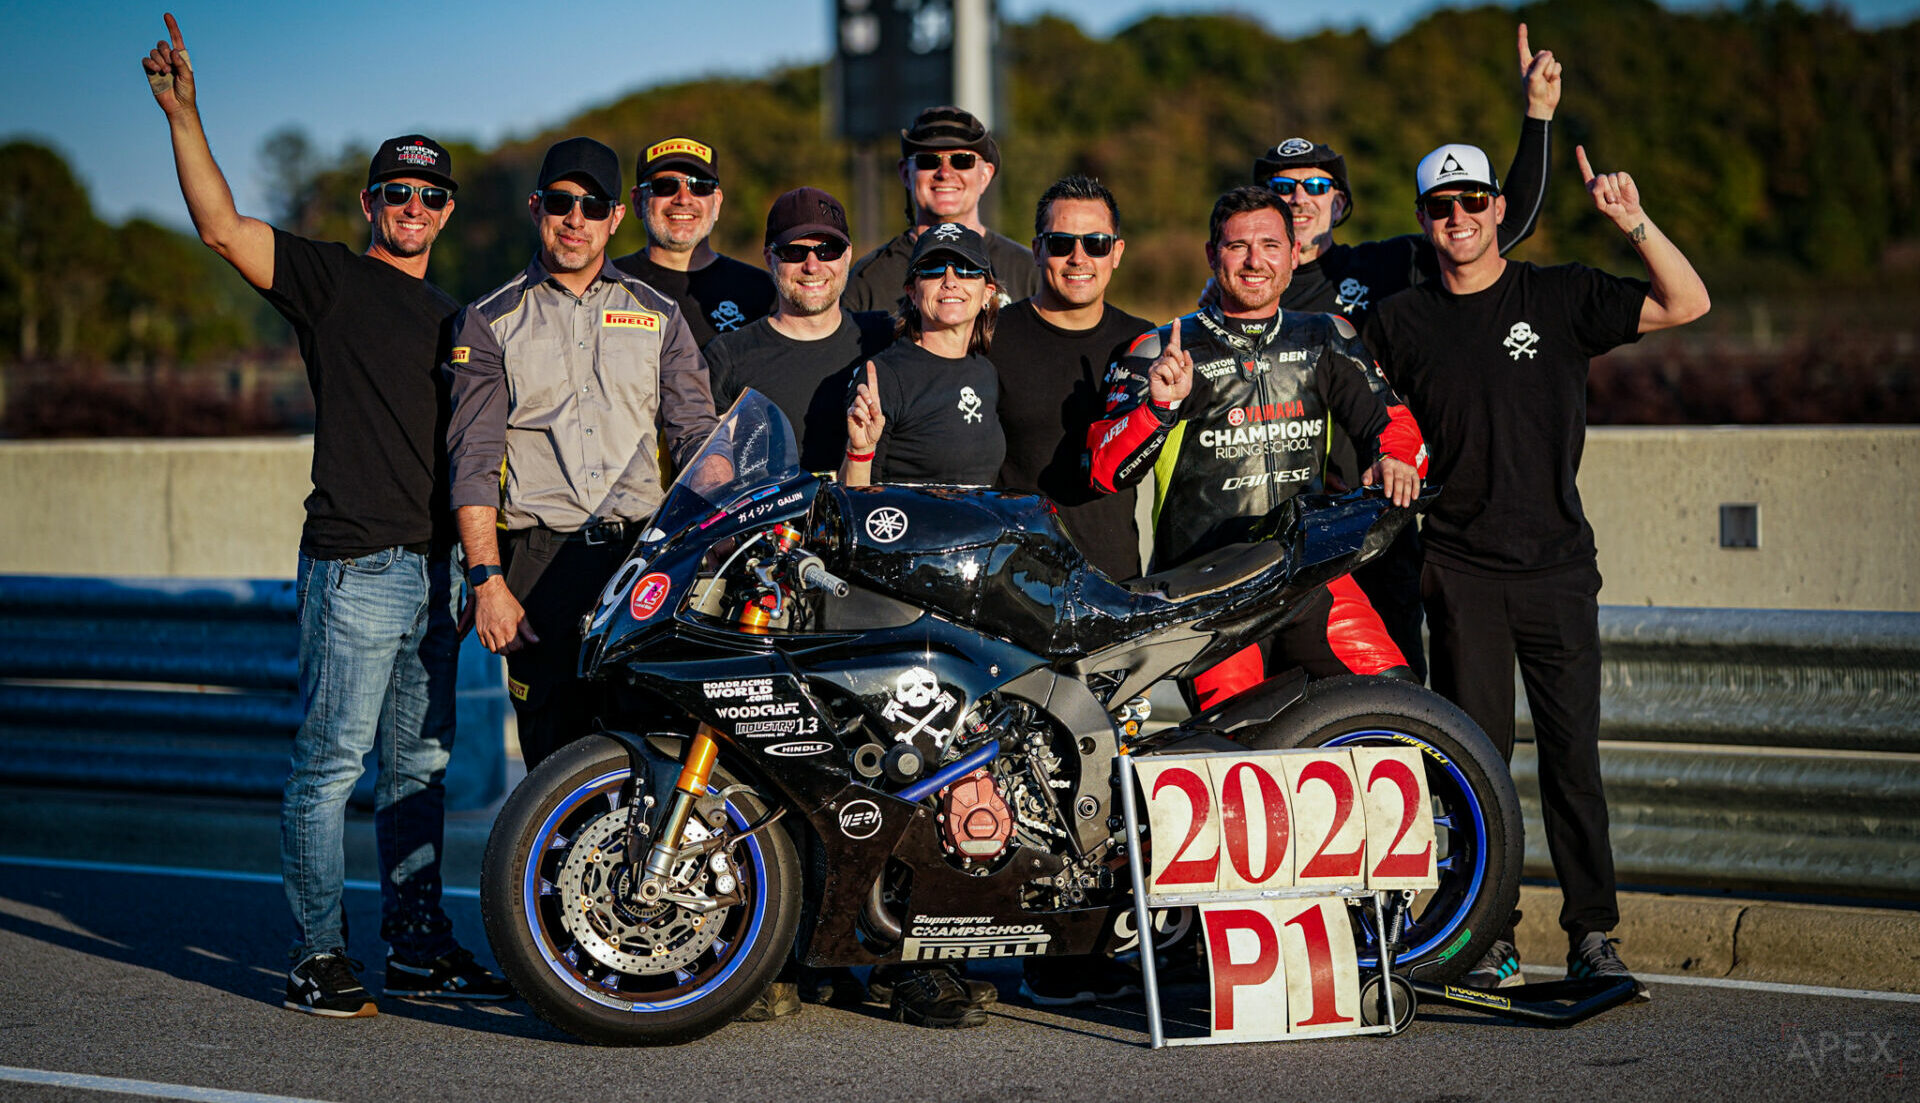 Pirelli Senior Racing Manager Oscar Solis (second from left) joins Army of Darkness' (from left) Geoff May, Anthony Consorte, YT Lechner, Melissa Berkoff, Tim Gooding, Chris Peris, Ben Walters, Sam Fleming, Cody Wyman, and their Yamaha YZF-R1 nicknamed “Gaijin” for a photo on pit lane at Barber Motorsports Park. Photo by Apex Productions LLC, courtesy Army of Darkness.